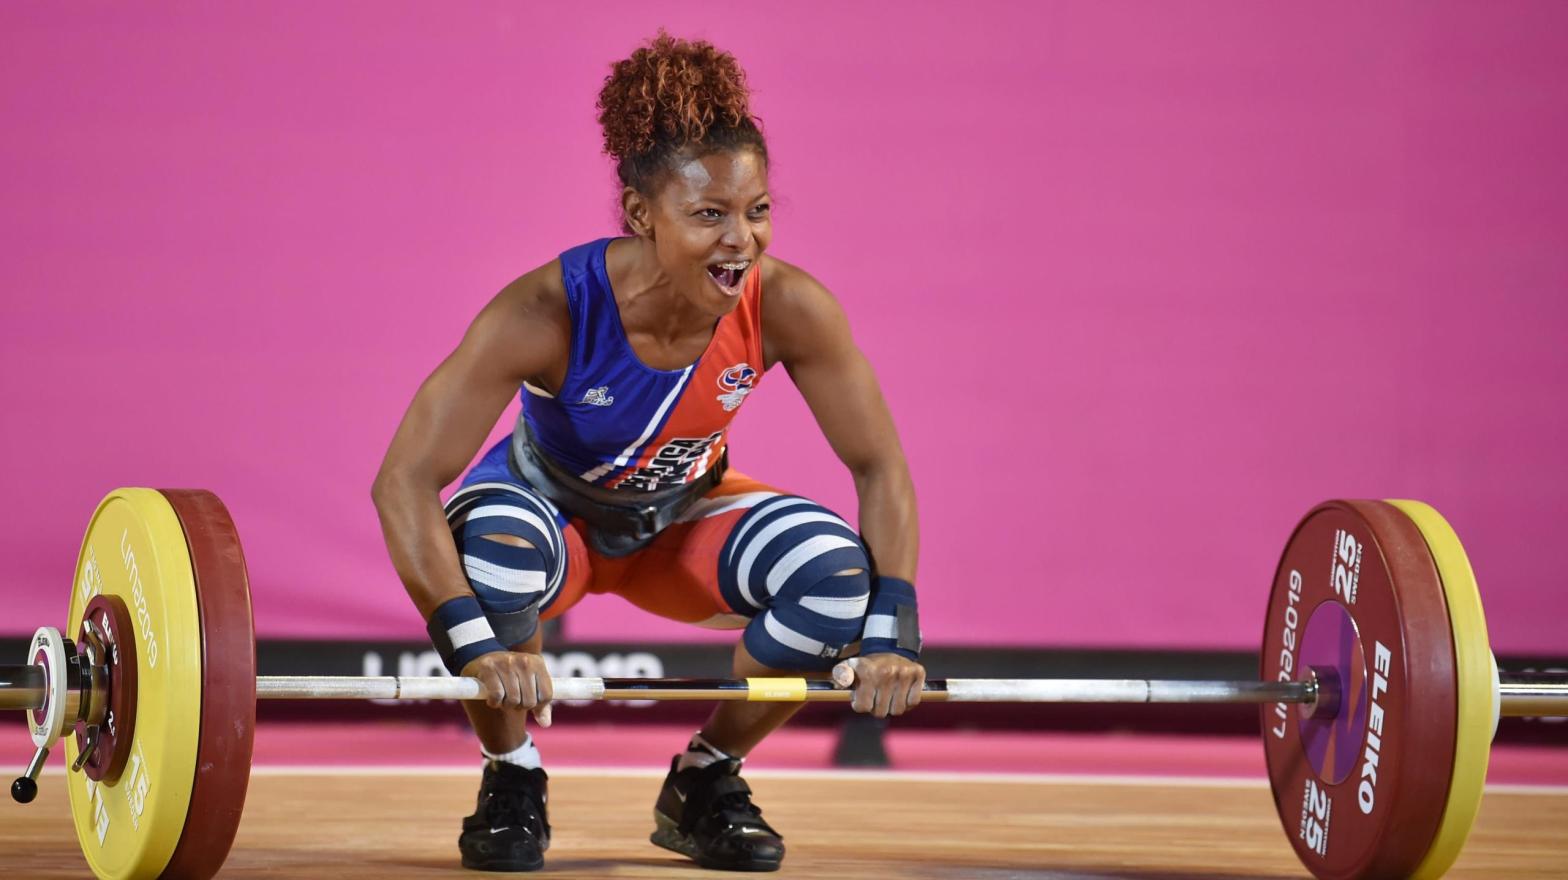 Weightlifter Beatriz Piron (from the Dominican Republic) winning gold in the 49kg weight class at 2019 Pan-Ams (Photo: CRIS BOURONCLE/AFP, Getty Images)